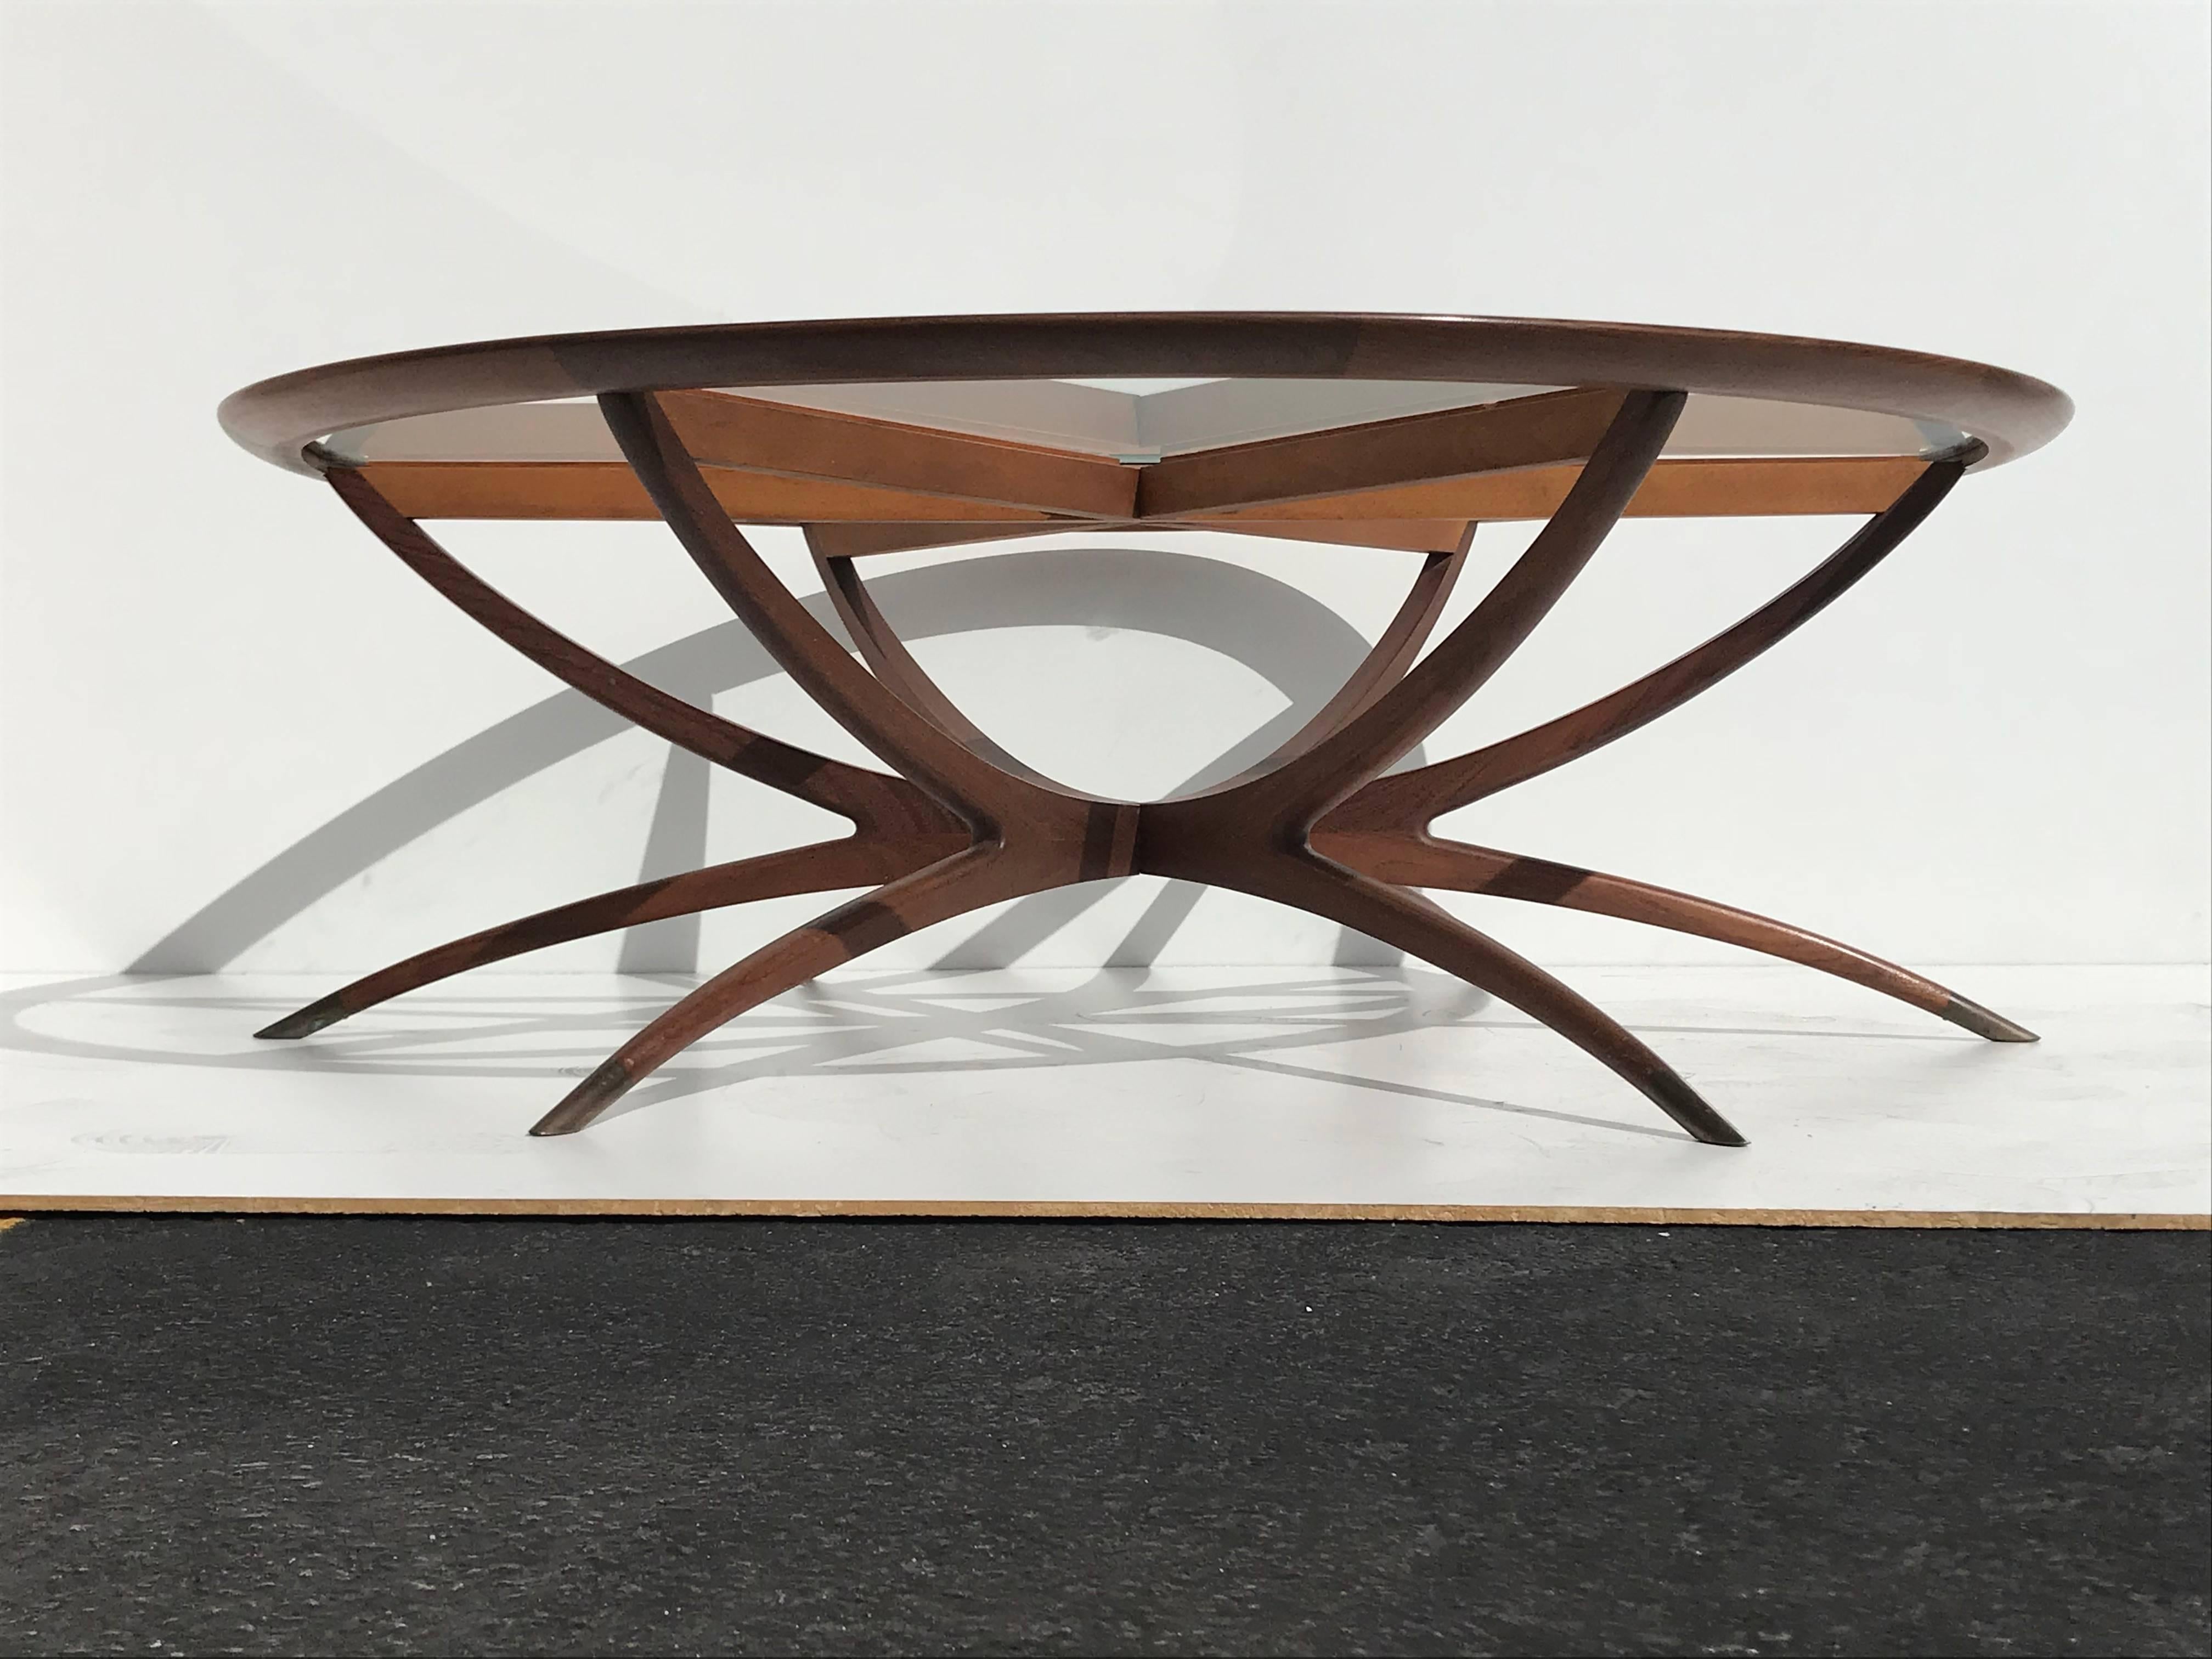 Midcentury Danish spider leg coffee table in the style of Carlo di Carli. Made of hard tropical teak wood and patinated brass sabot legs which can be polished at customers request. Base is detachable and folds for easy storage and moving.

Offered